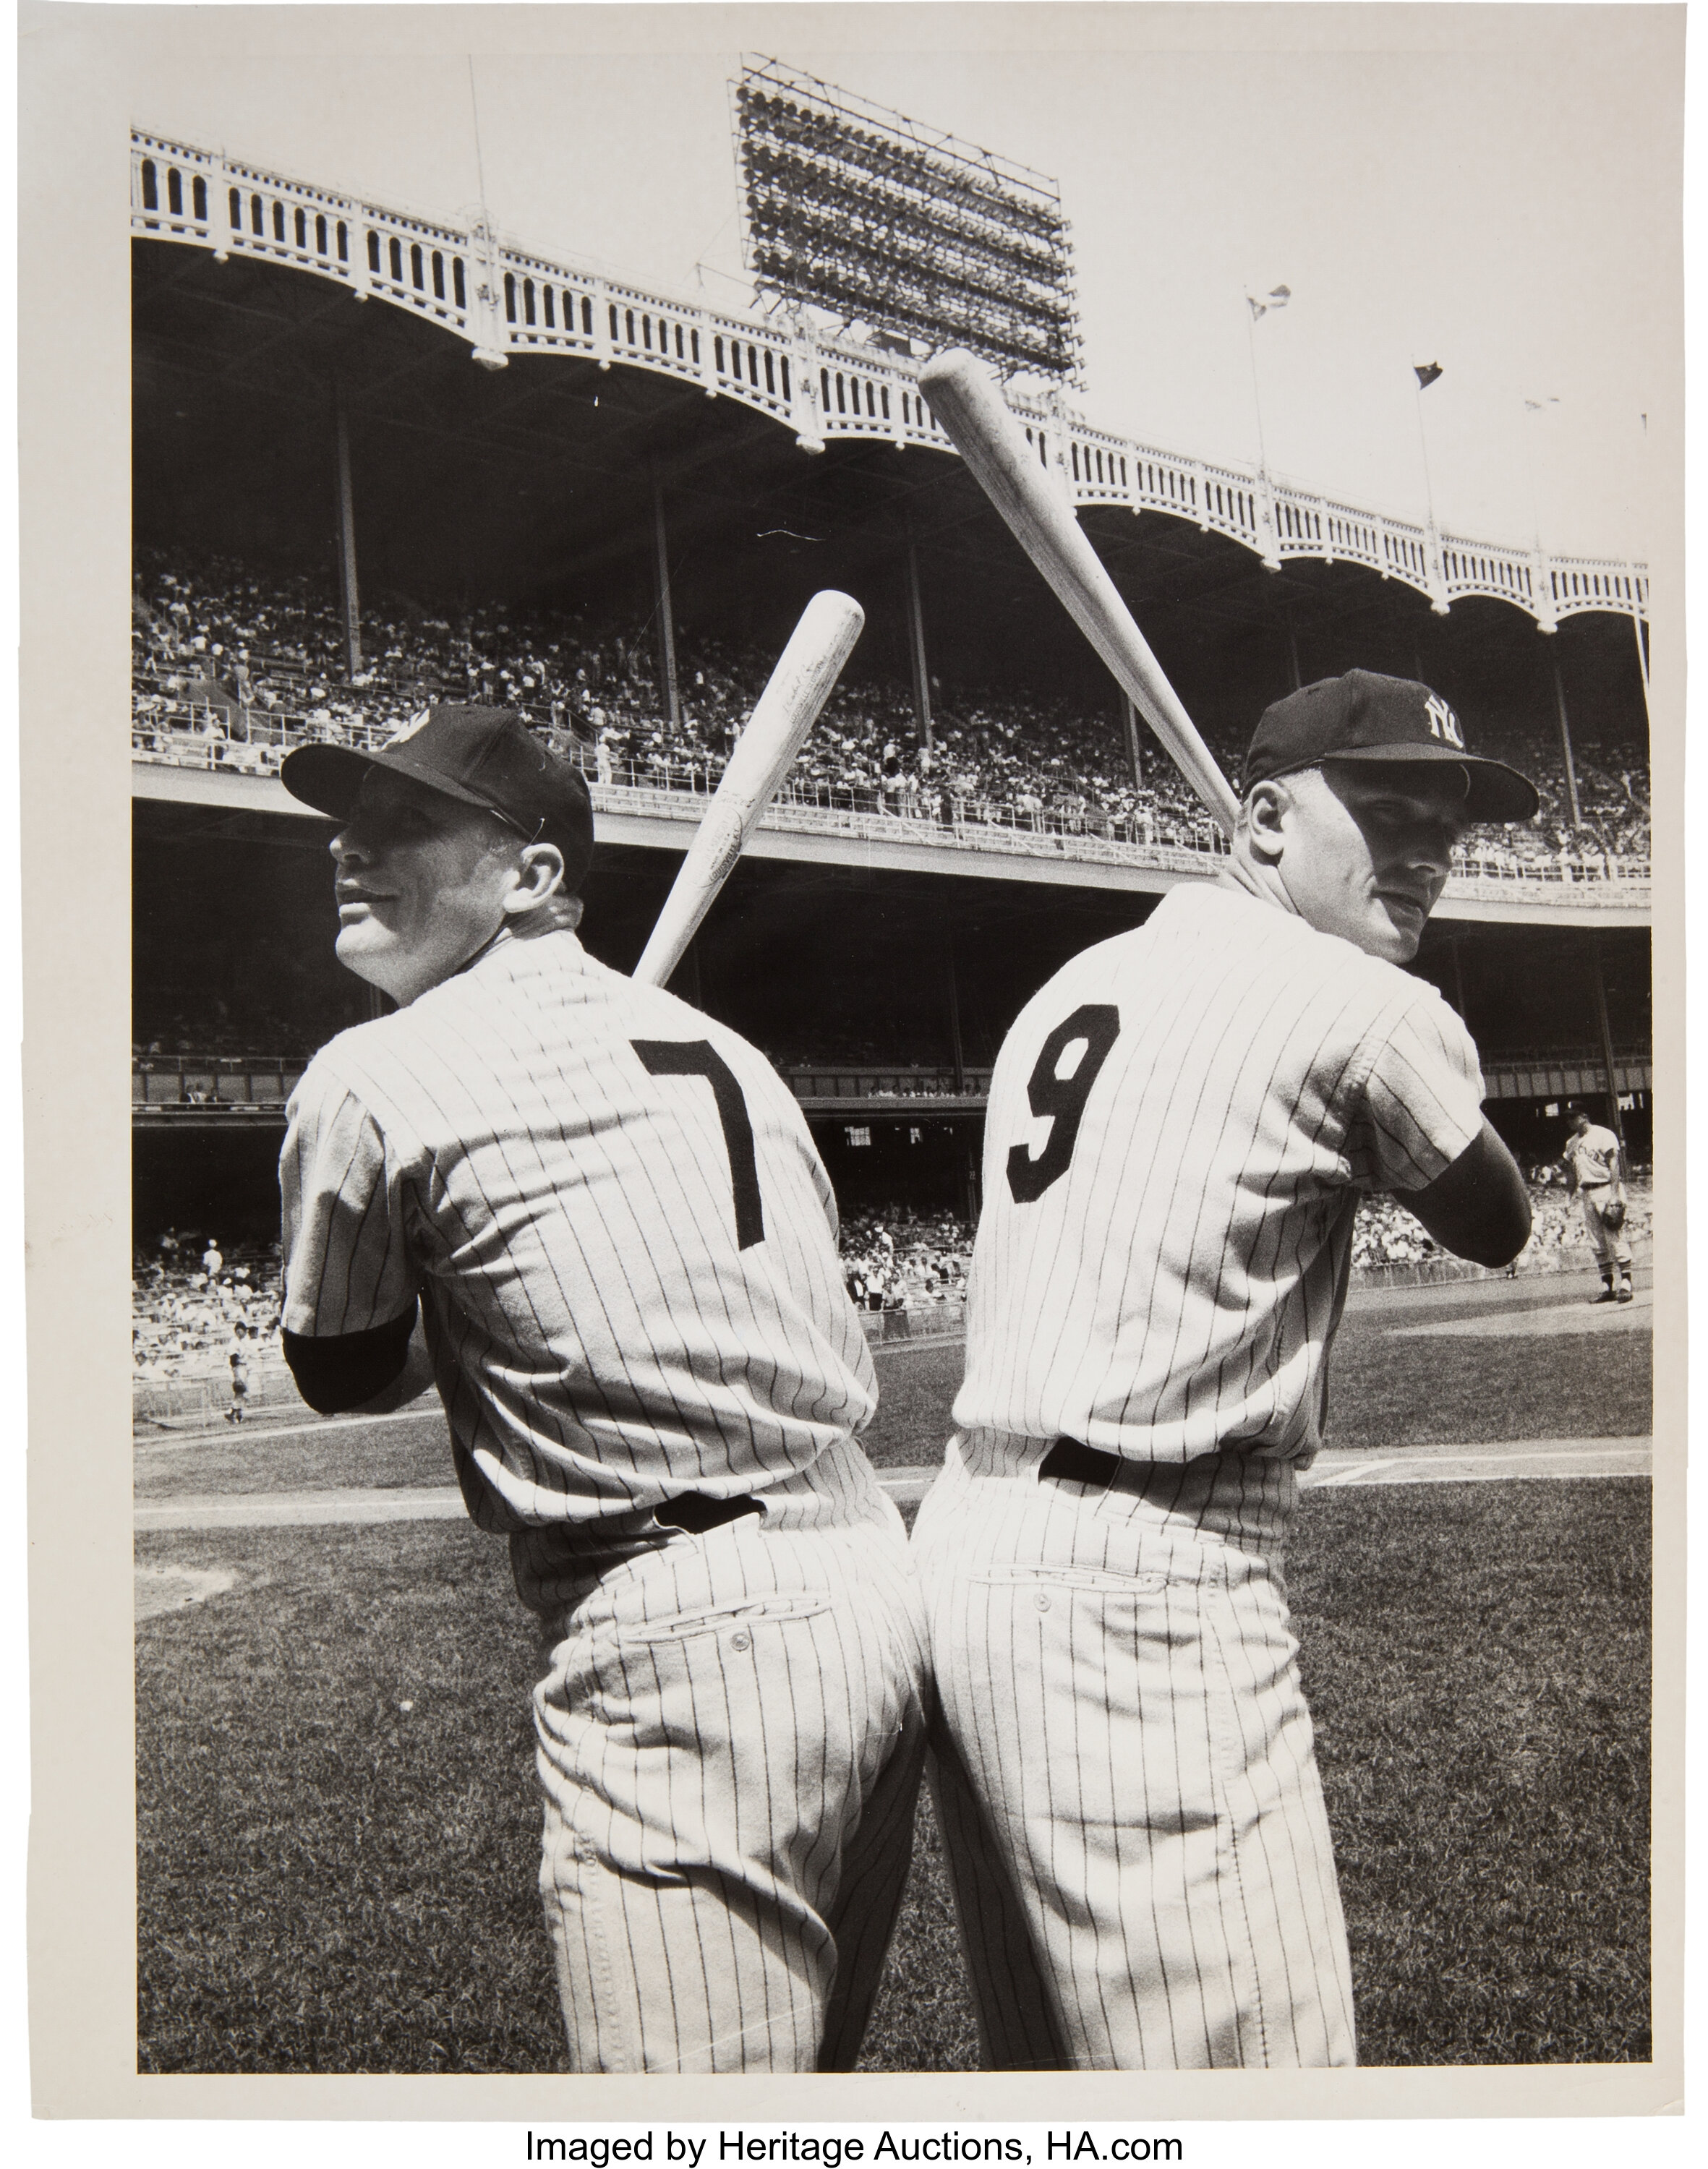 October 1, 1961 Roger Maris Holding 61 Jersey and 61st Home Run Baseball  Photograph by Brown Brothers (PSA/DNA Type I)